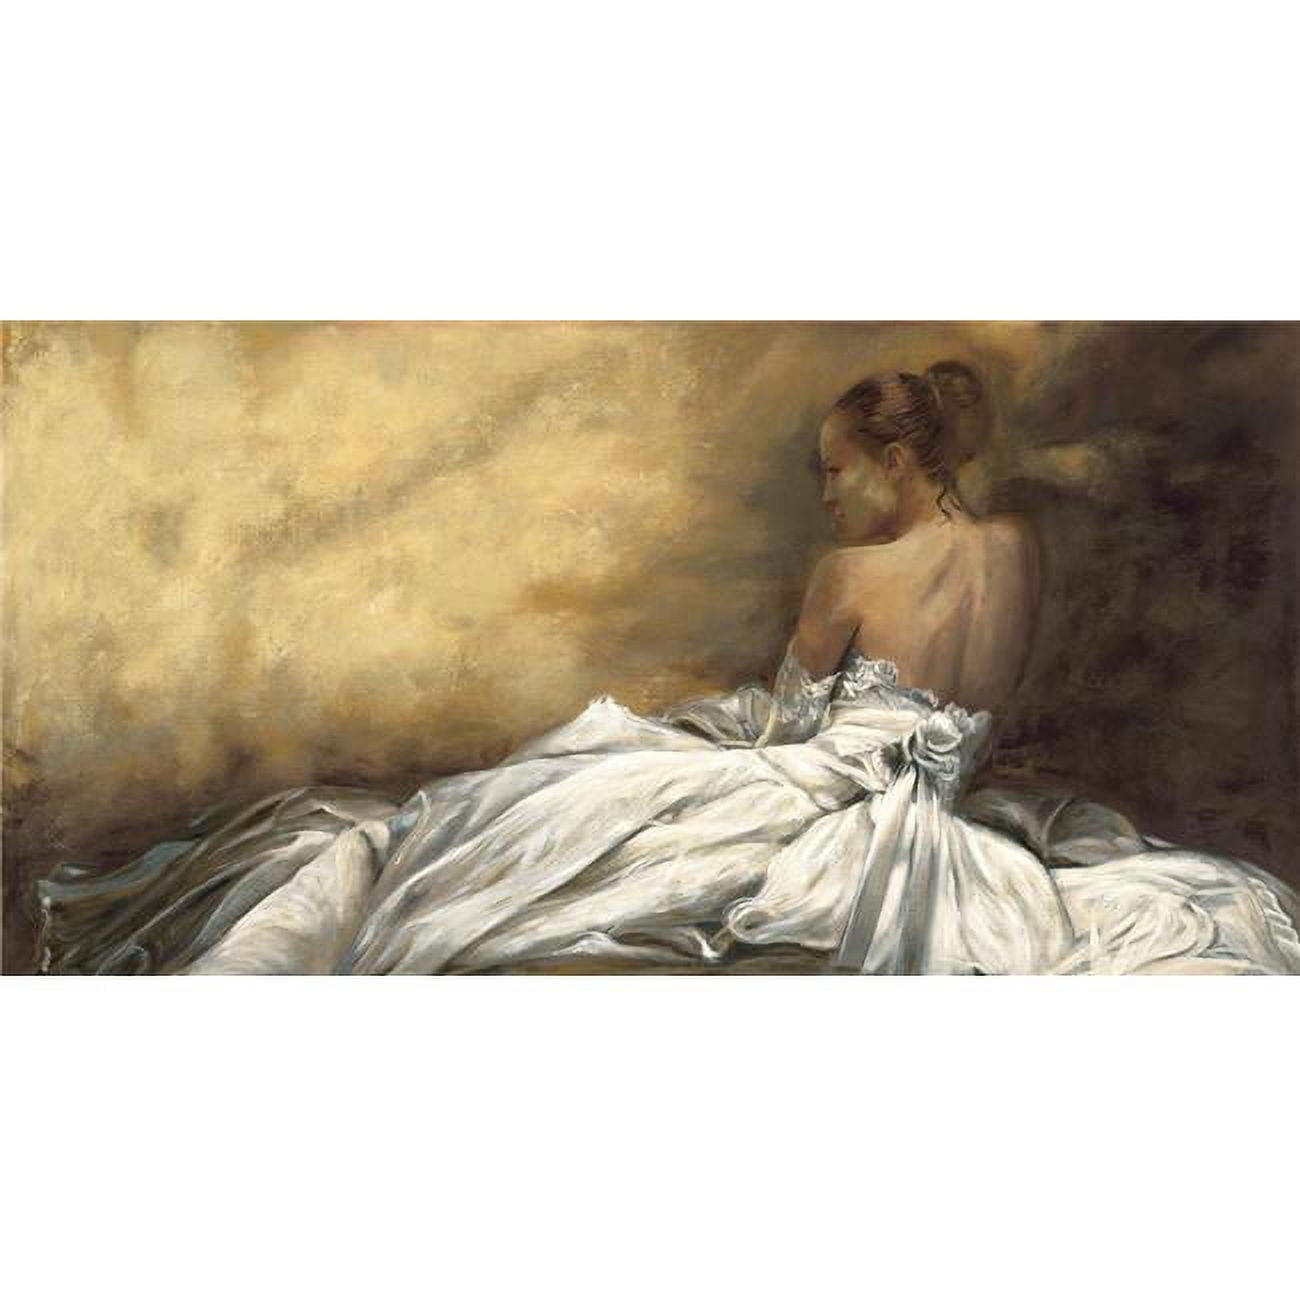 Eleganza In Bianco - Elegance In White By Andrea Bassetti Premium Gallery-wrapped Canvas Giclee Art - Ready To Hang, 12 X 24 X 1.5 In.